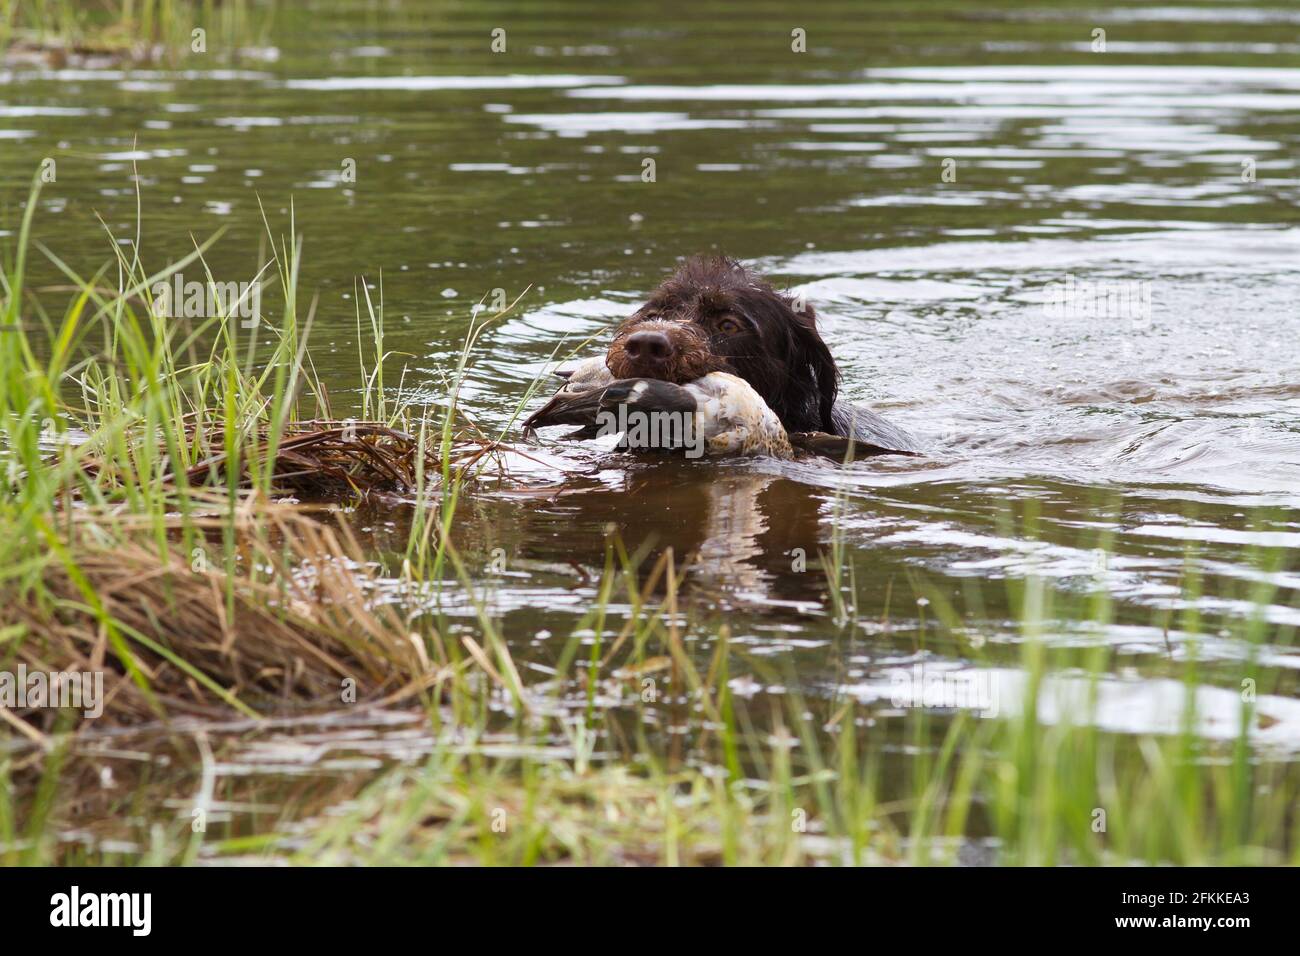 a hunting dog with a duck in its teeth swims to the grassy shore of the lake Stock Photo